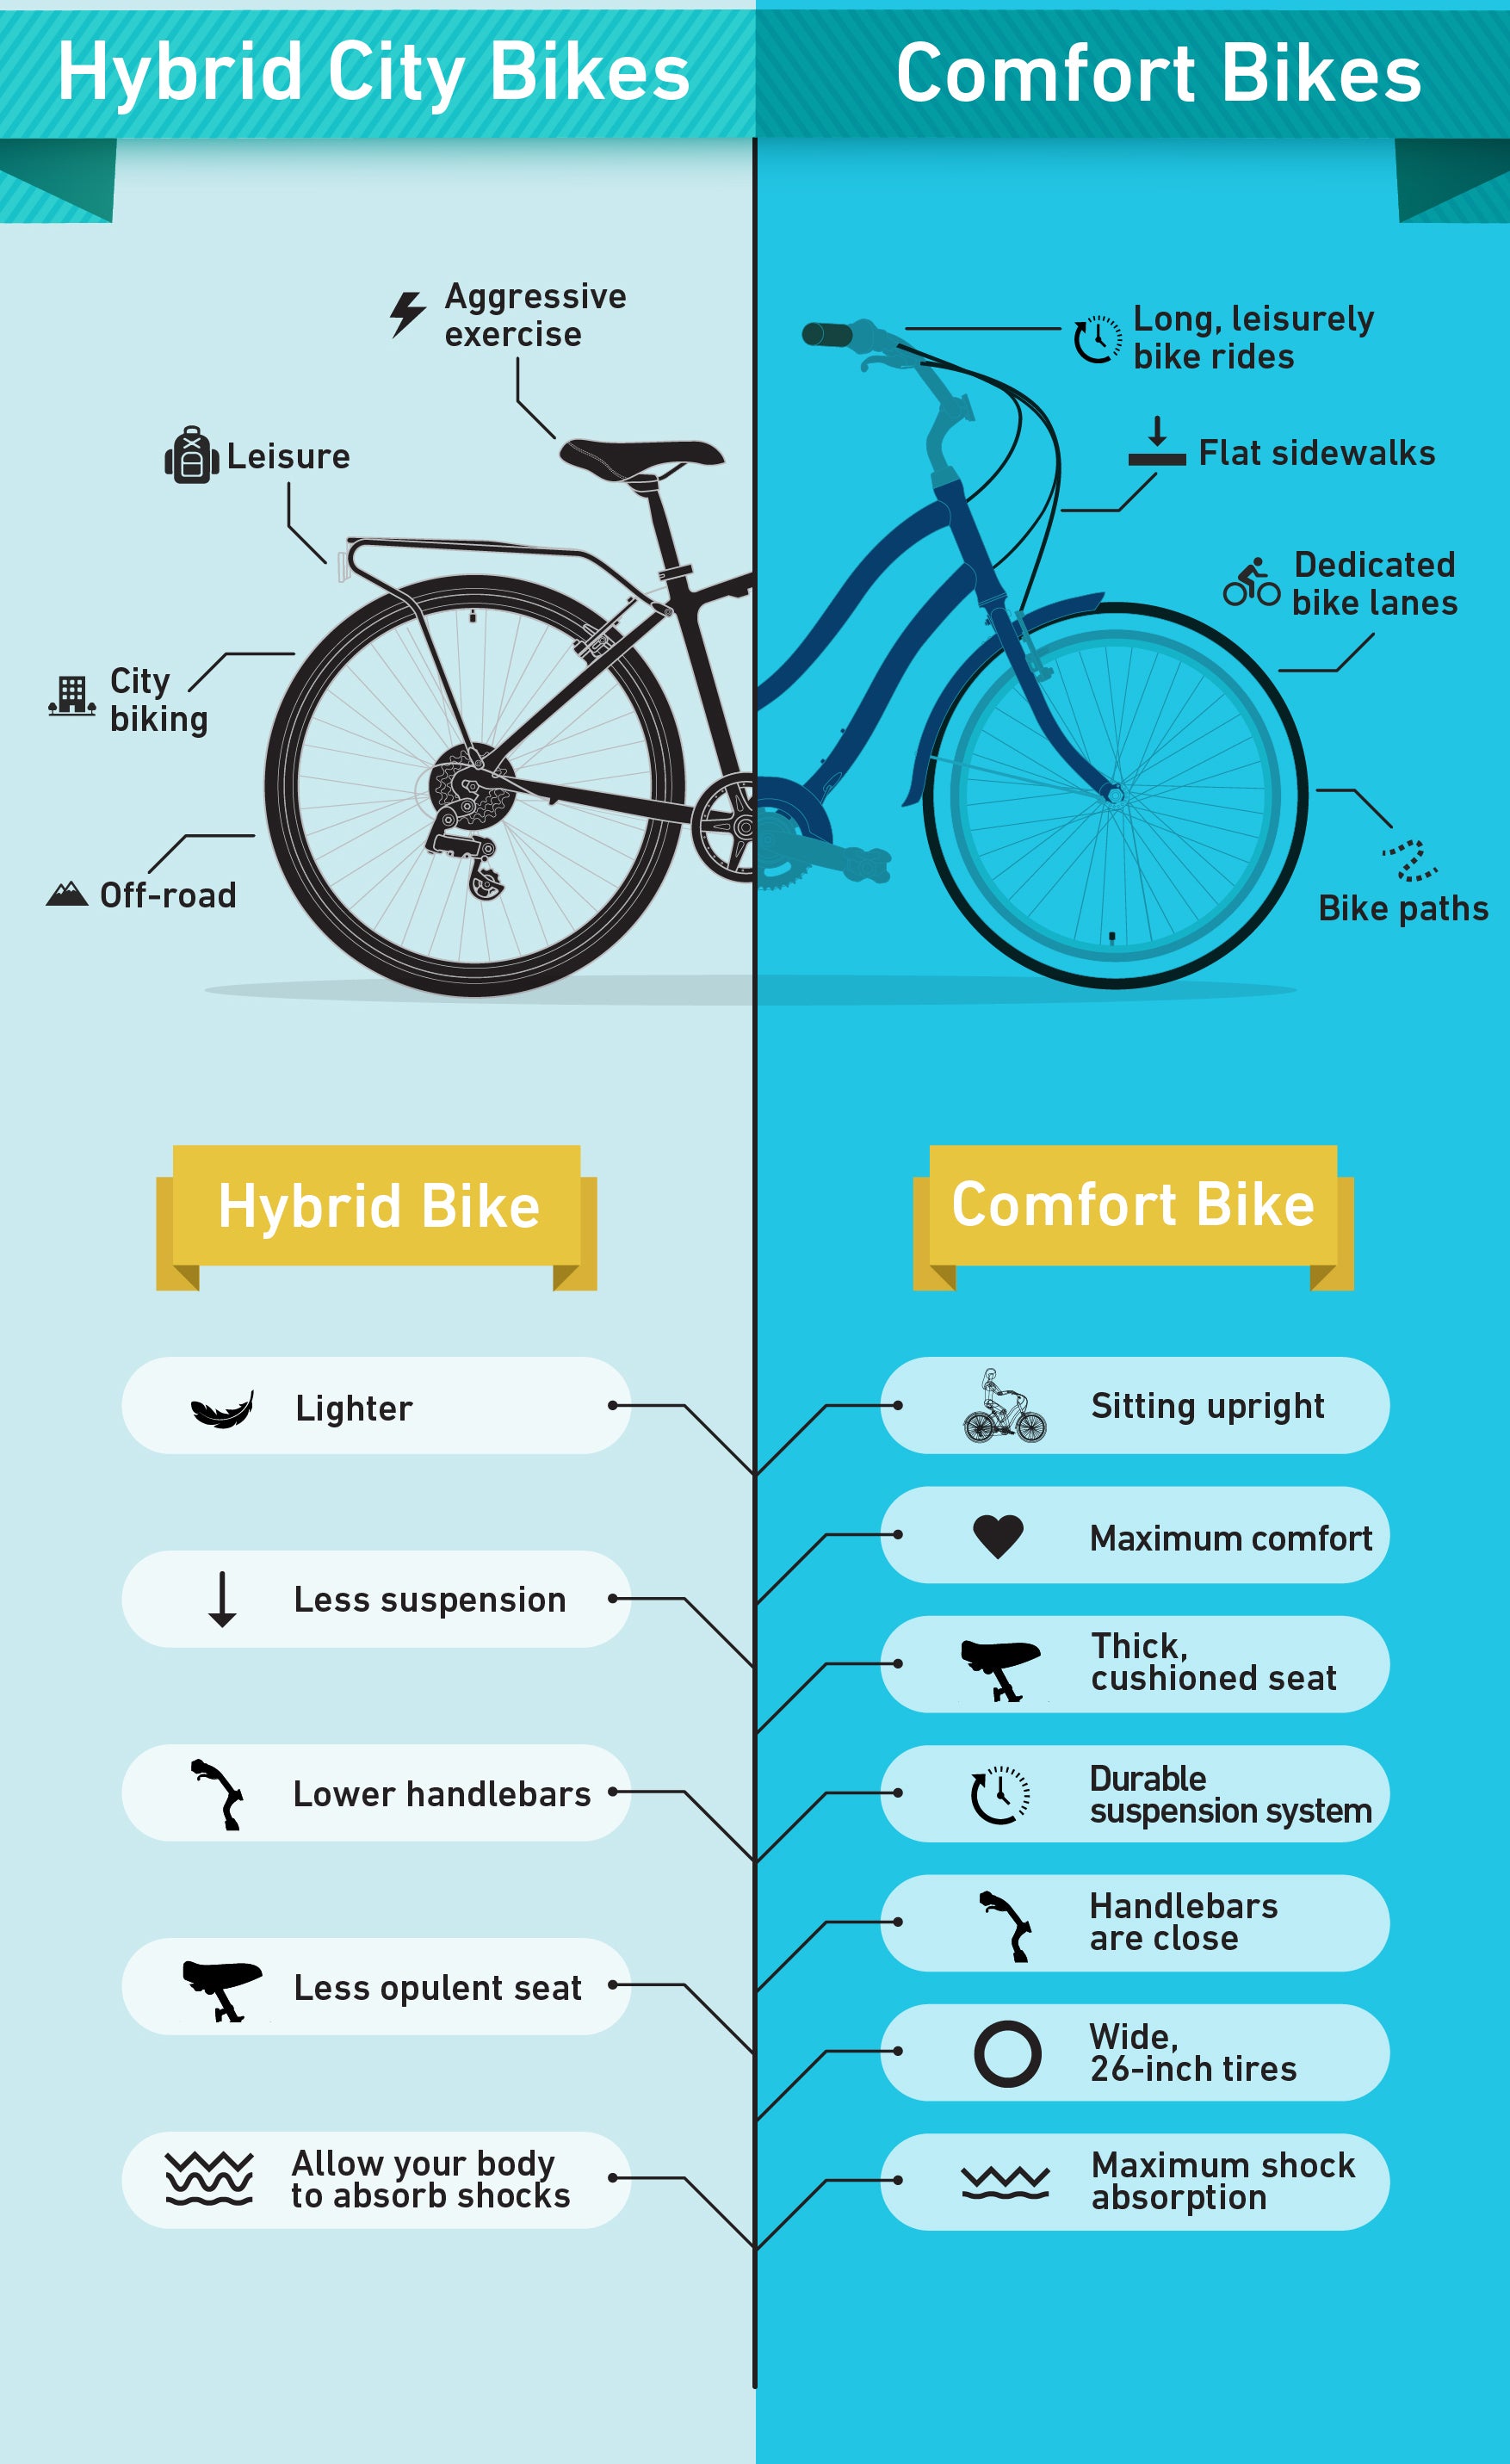 How to set a comfortable bicycle riding position